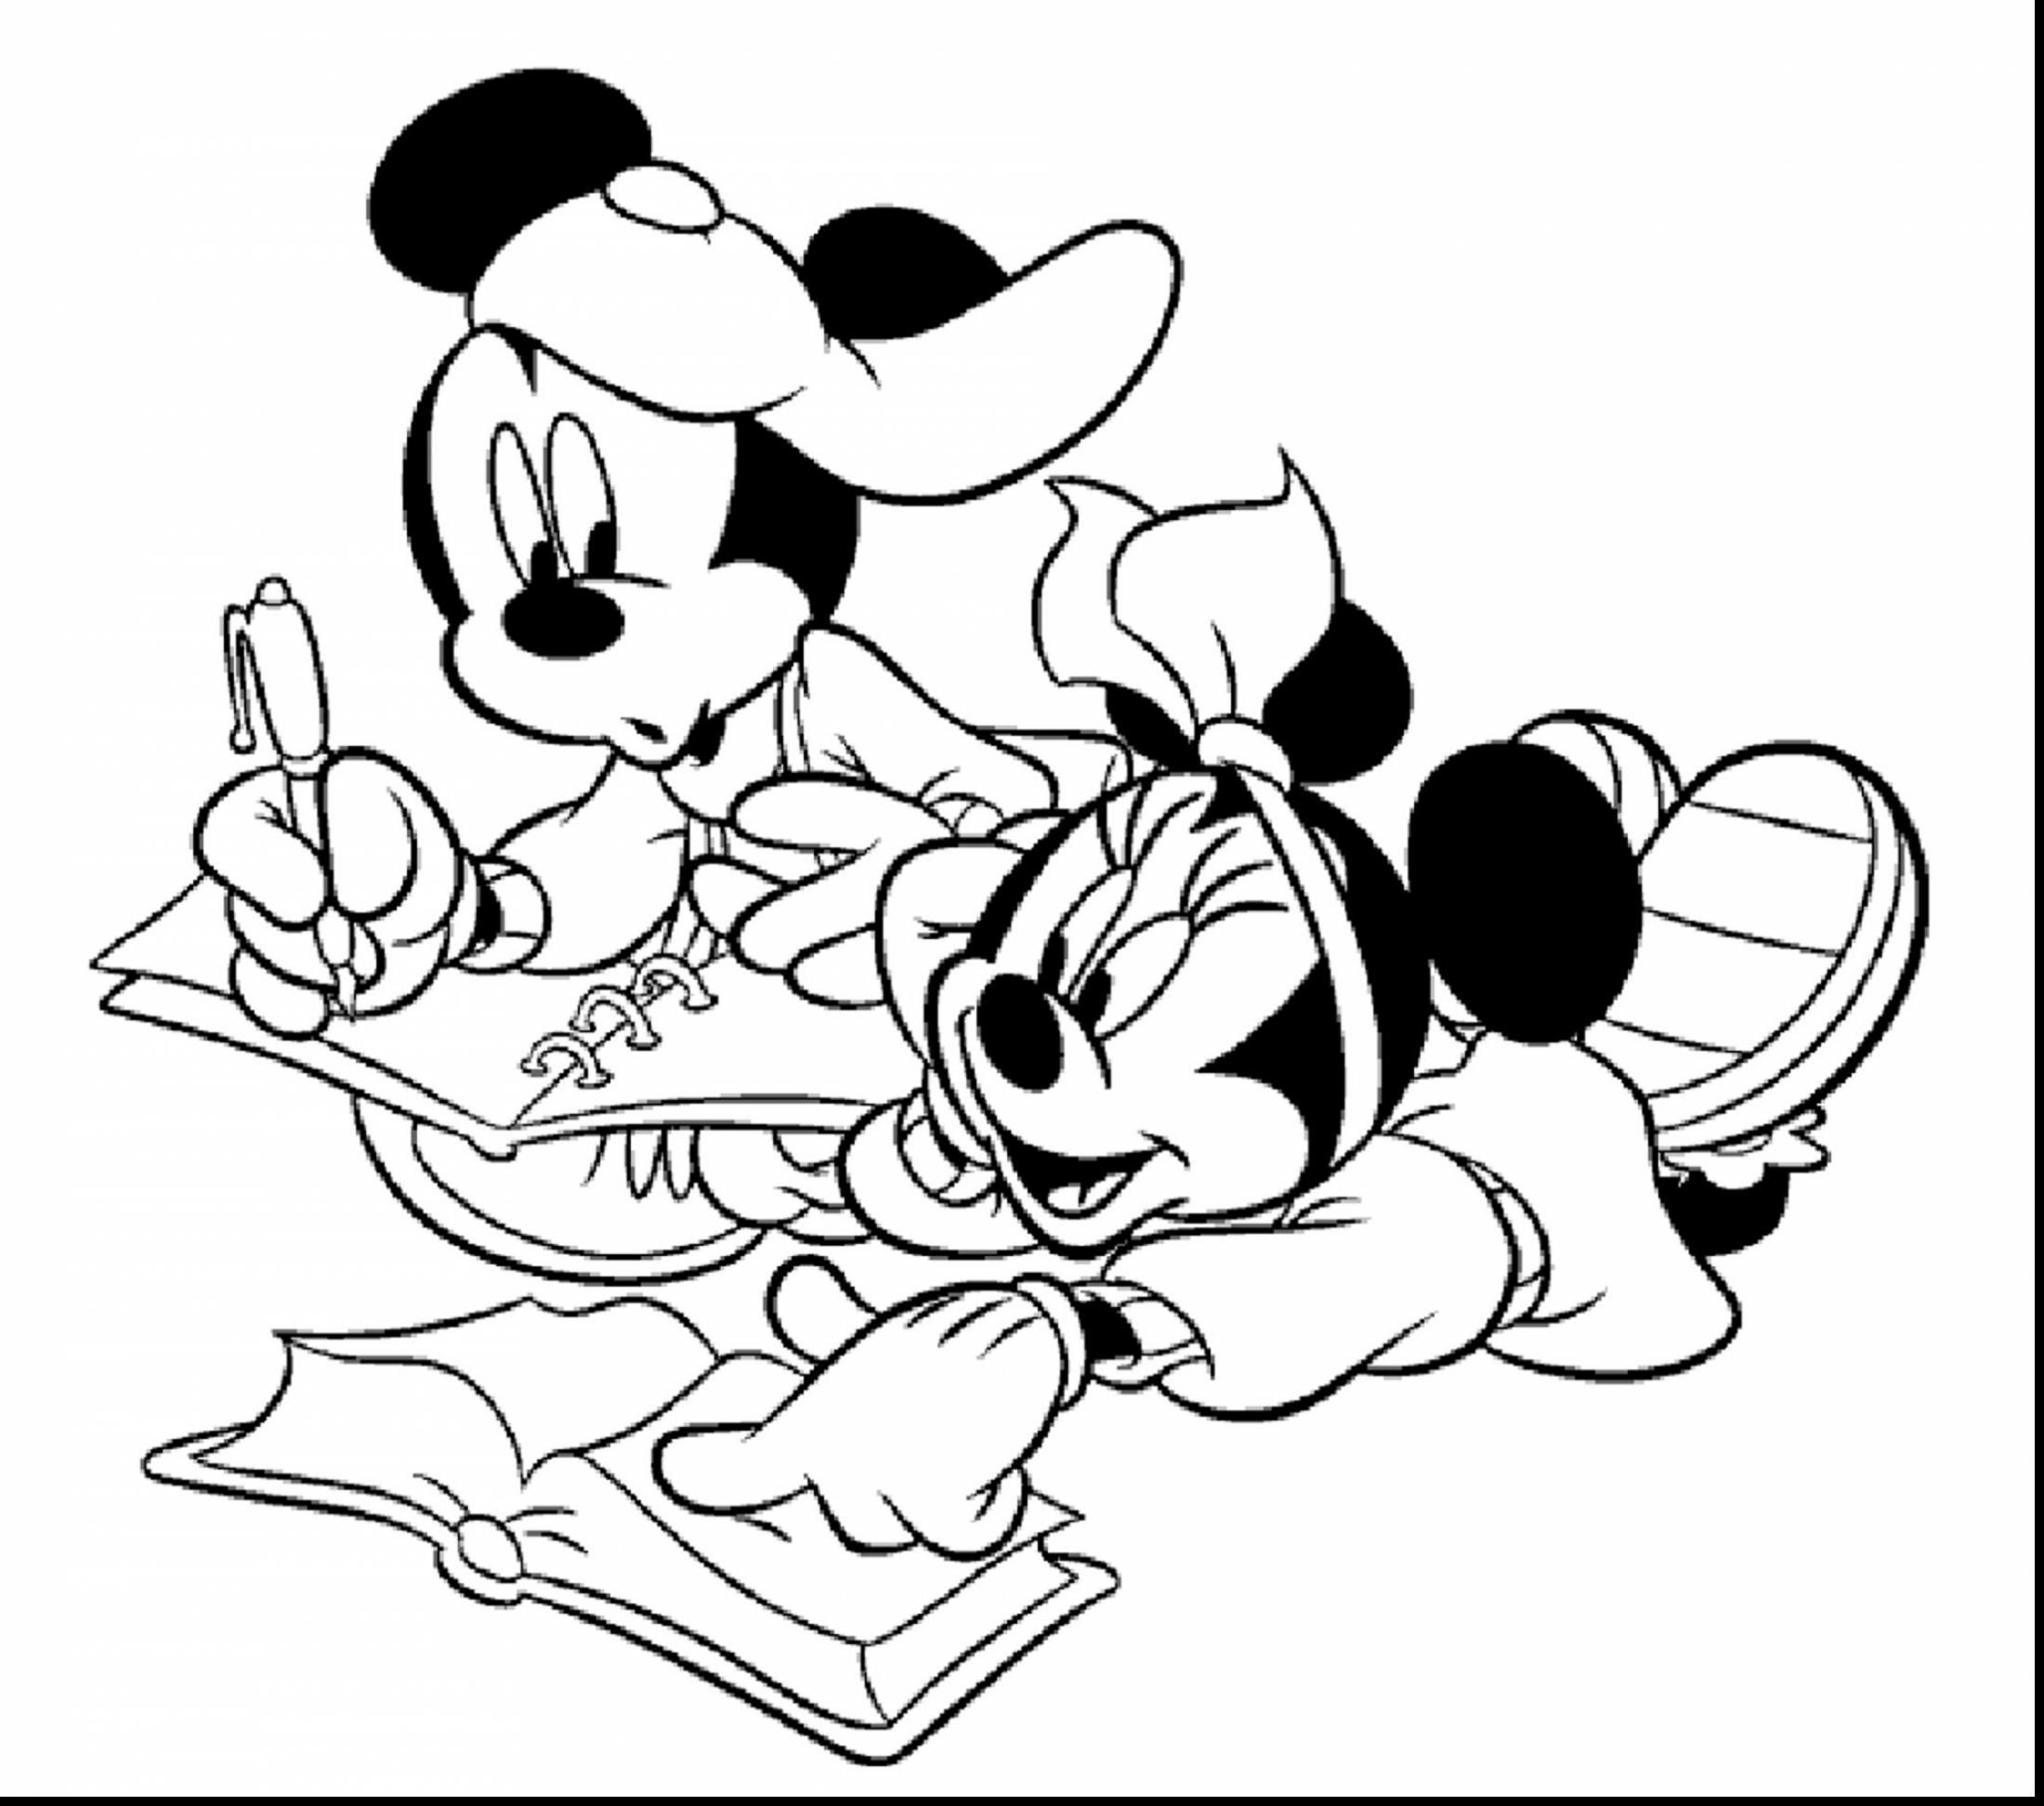 Minnie Mouse Coloring Pages Pdf at Free printable